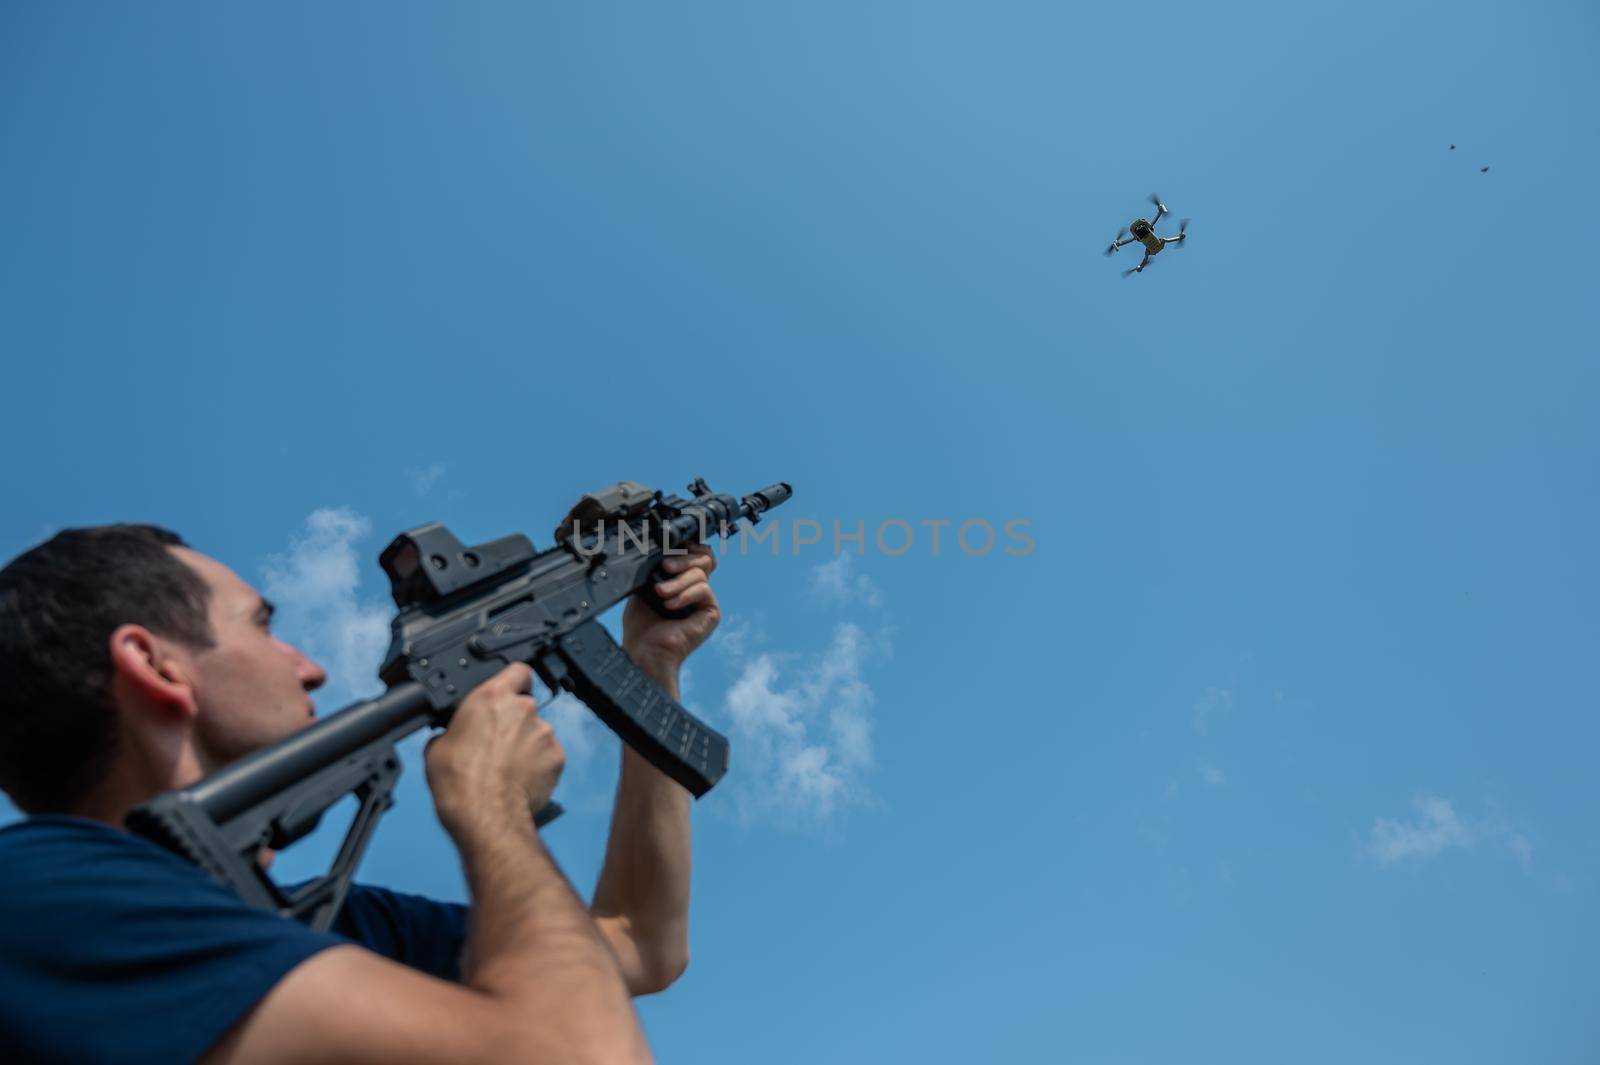 Caucasian man shoots a flying drone with a rifle